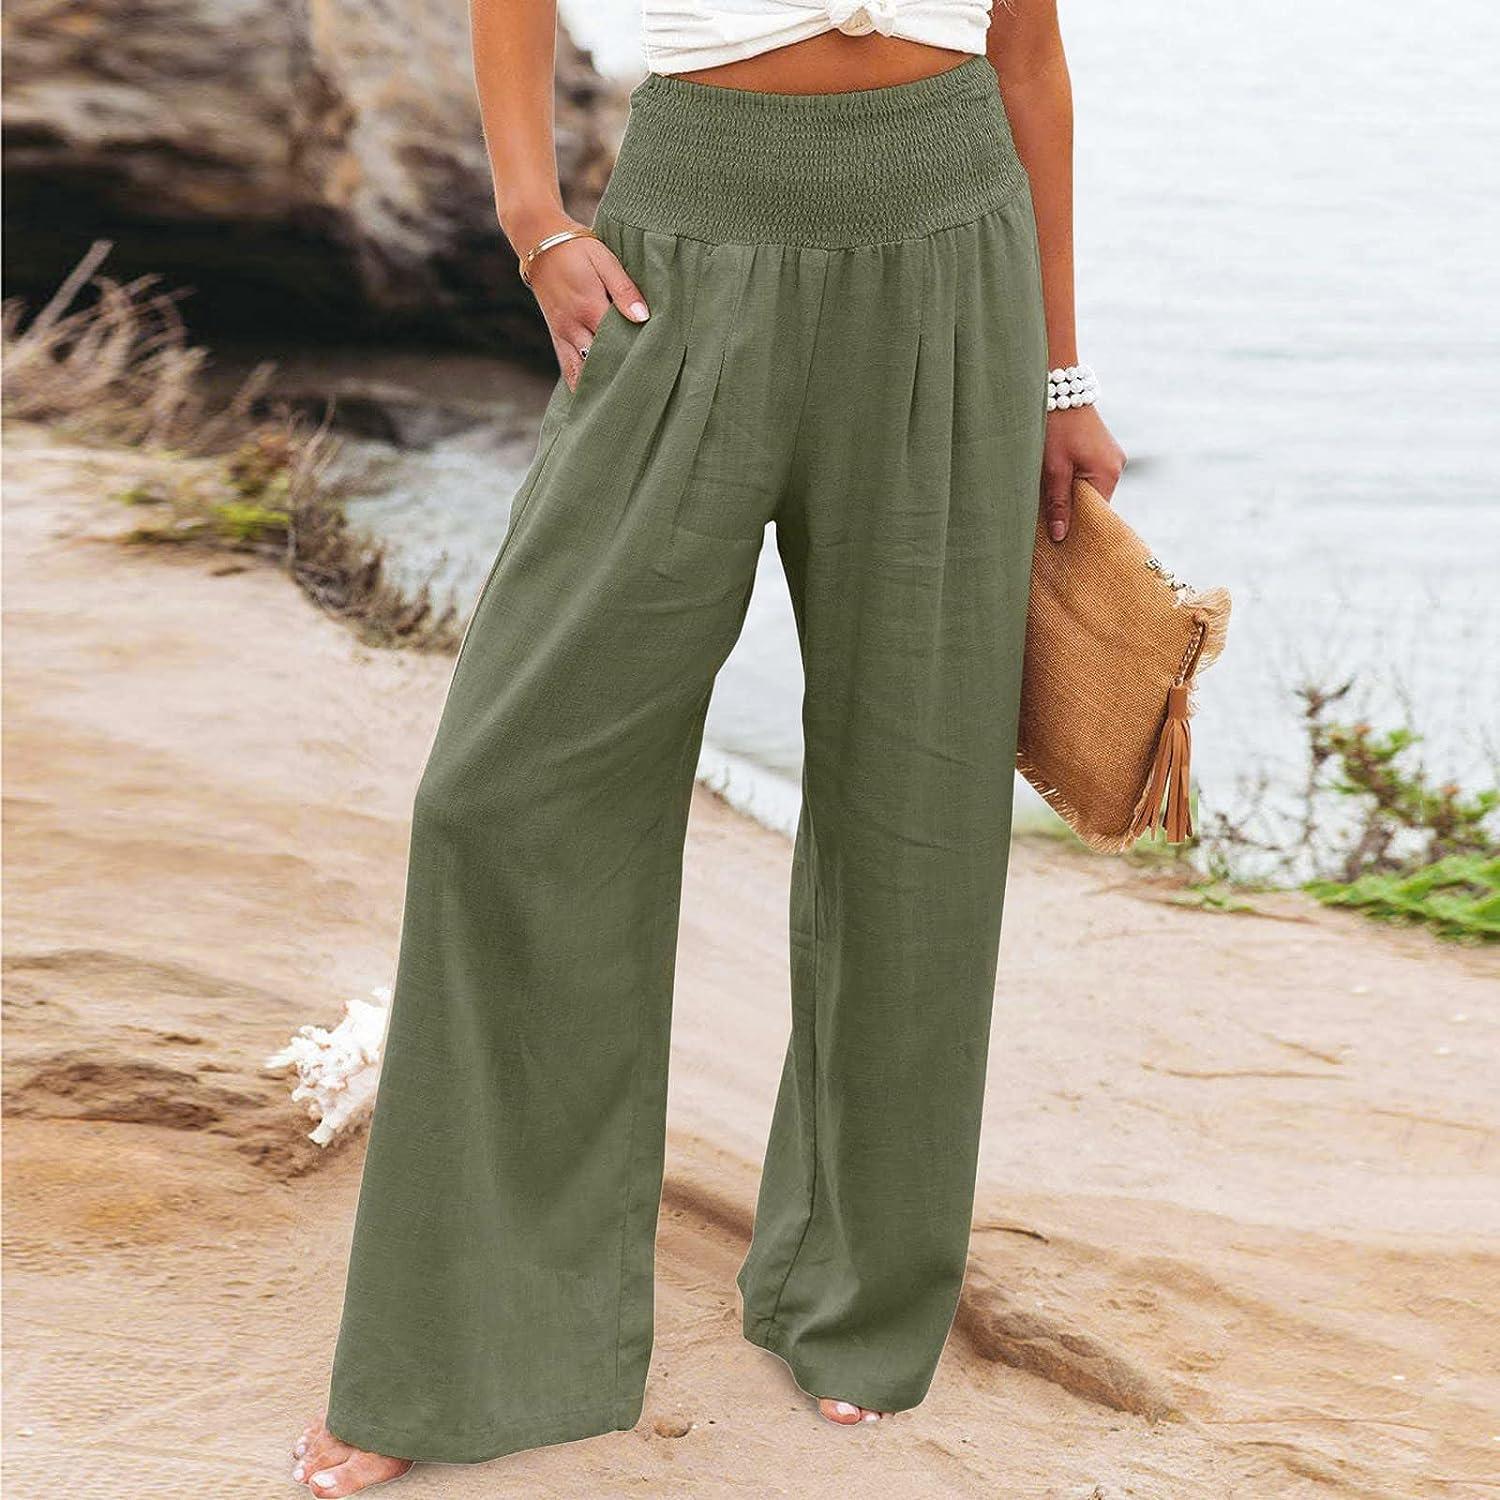 Straight Cut Summer Pants With Pockets For Women| The Feel Good Studio